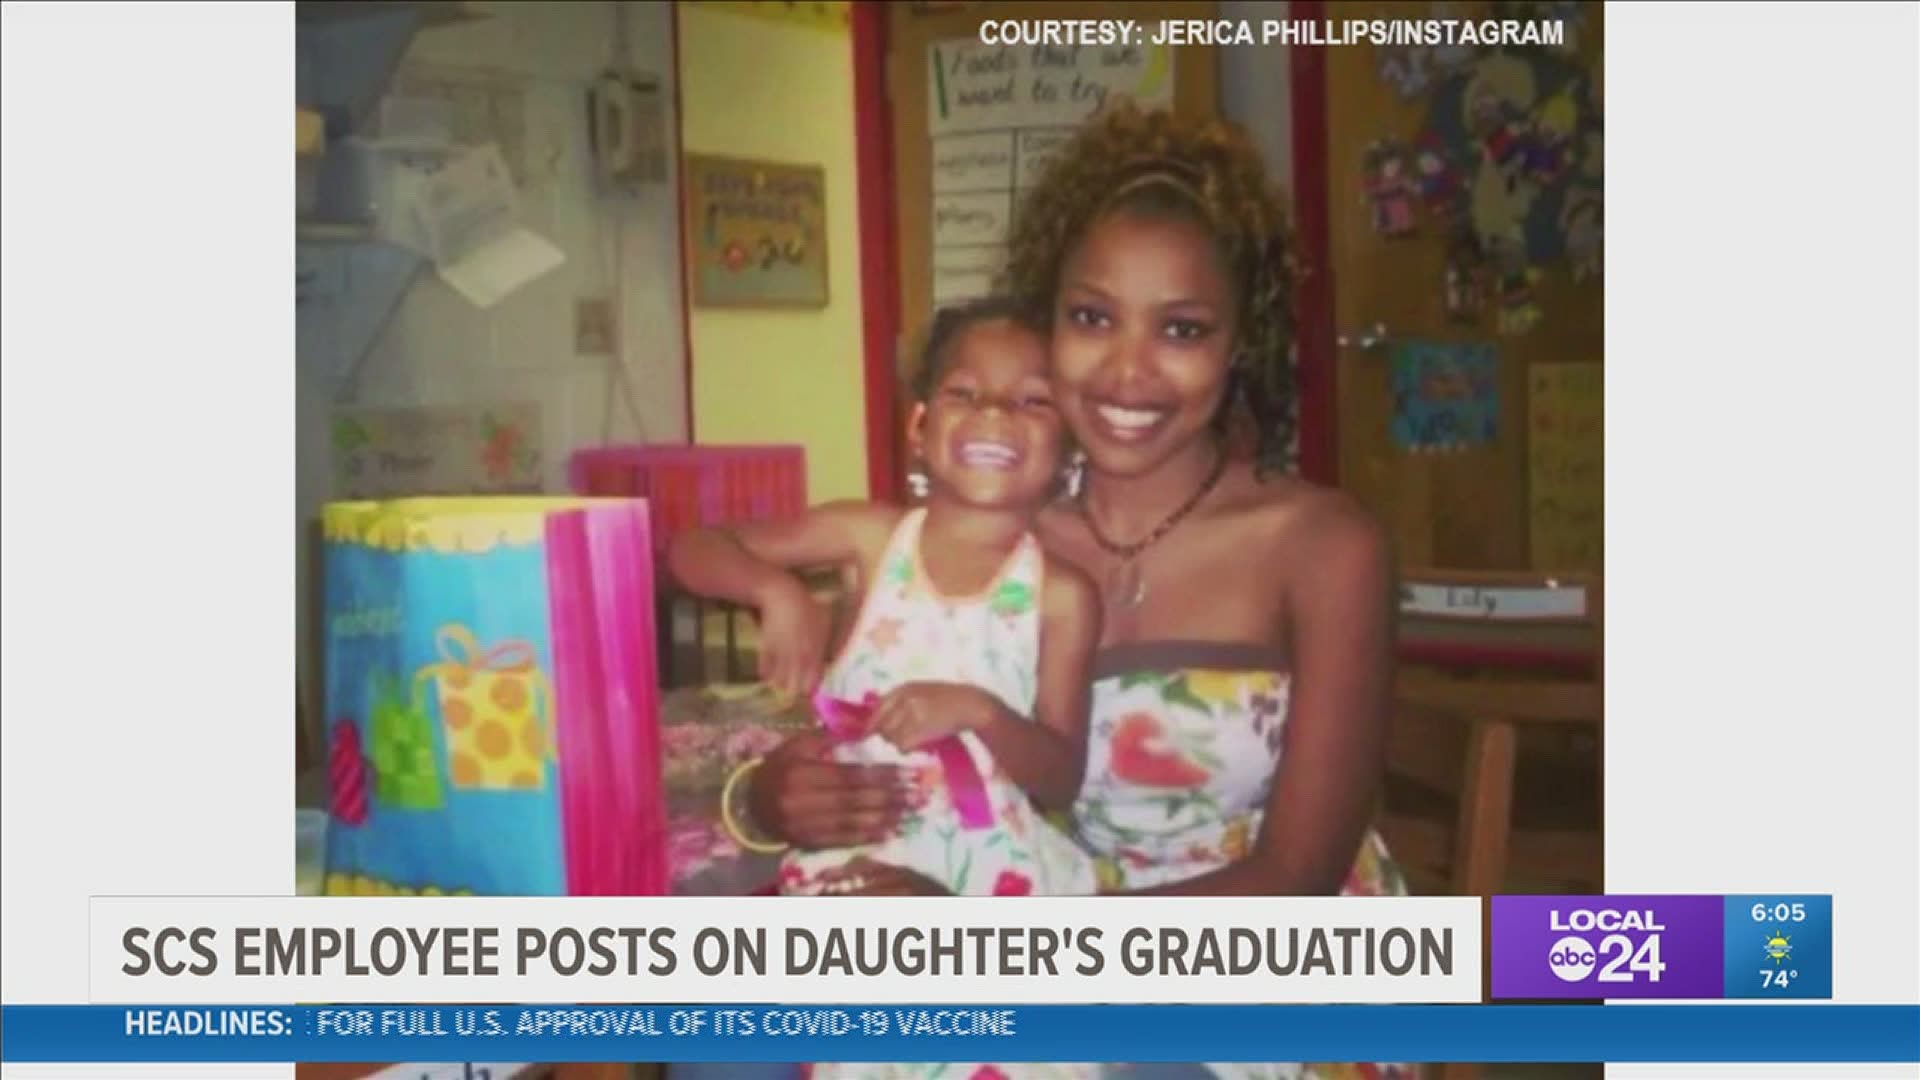 Phillips is celebrating her daughter's recent graduation, and her story of how life comes first circle was featured on Good Morning America.